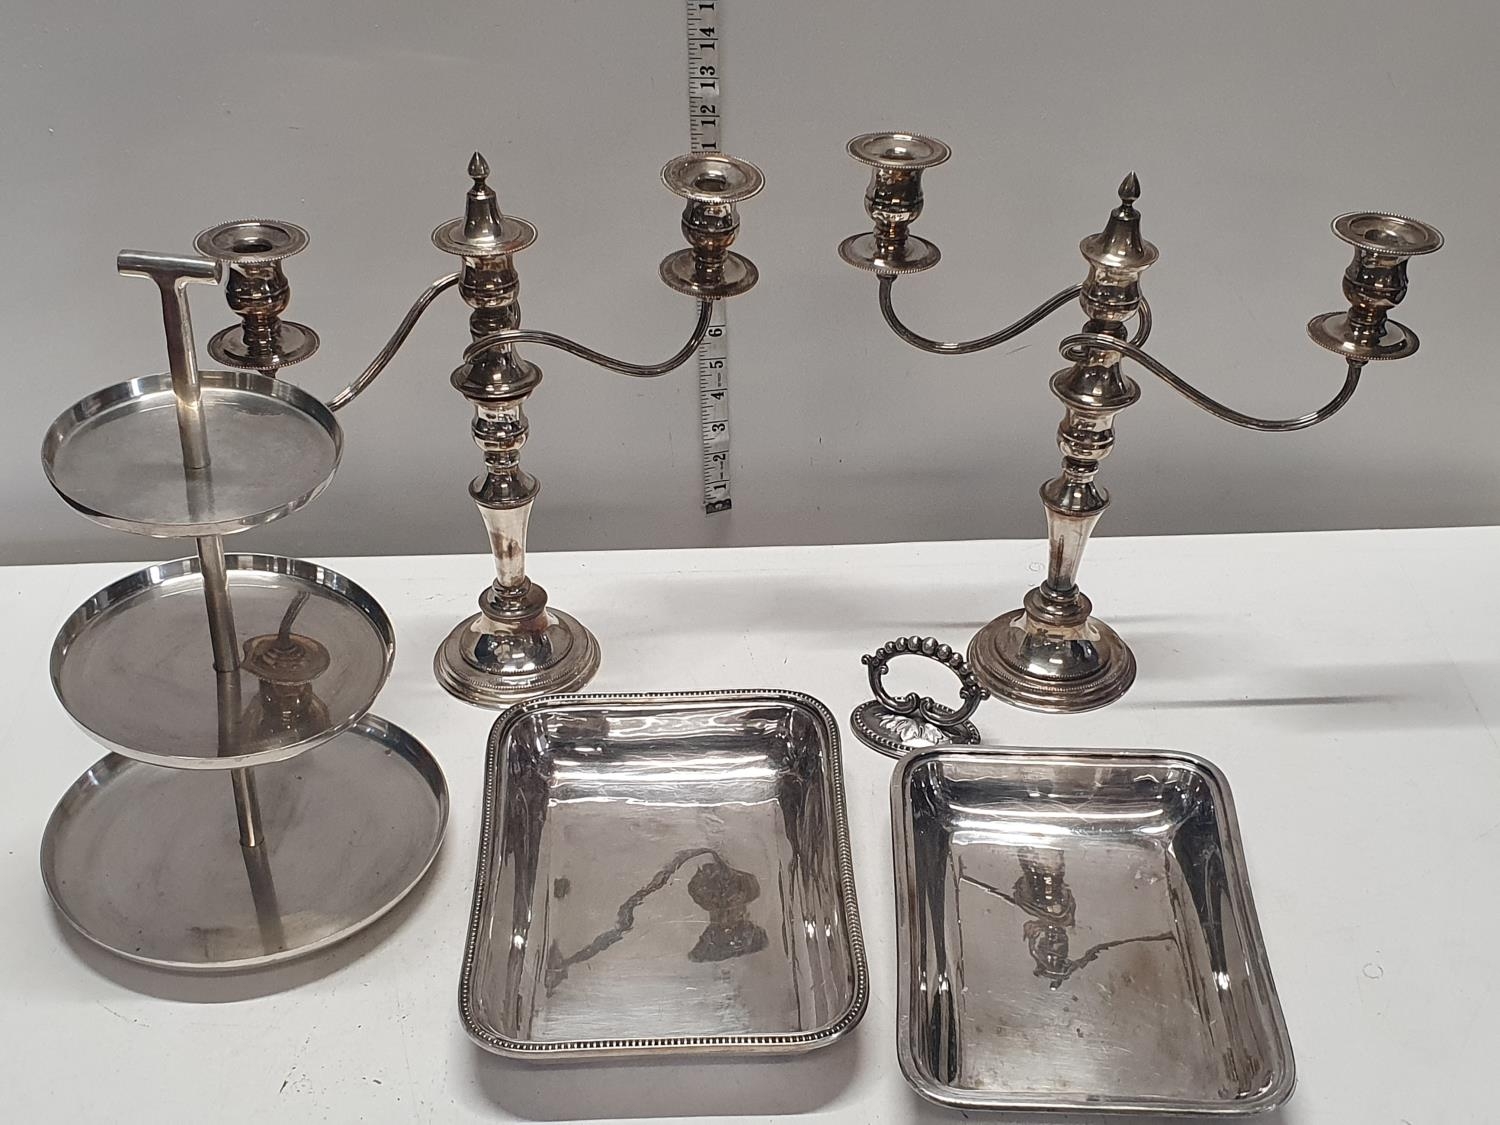 A selection of silver plated wares including candelabras and cake stands. Shipping unavailable